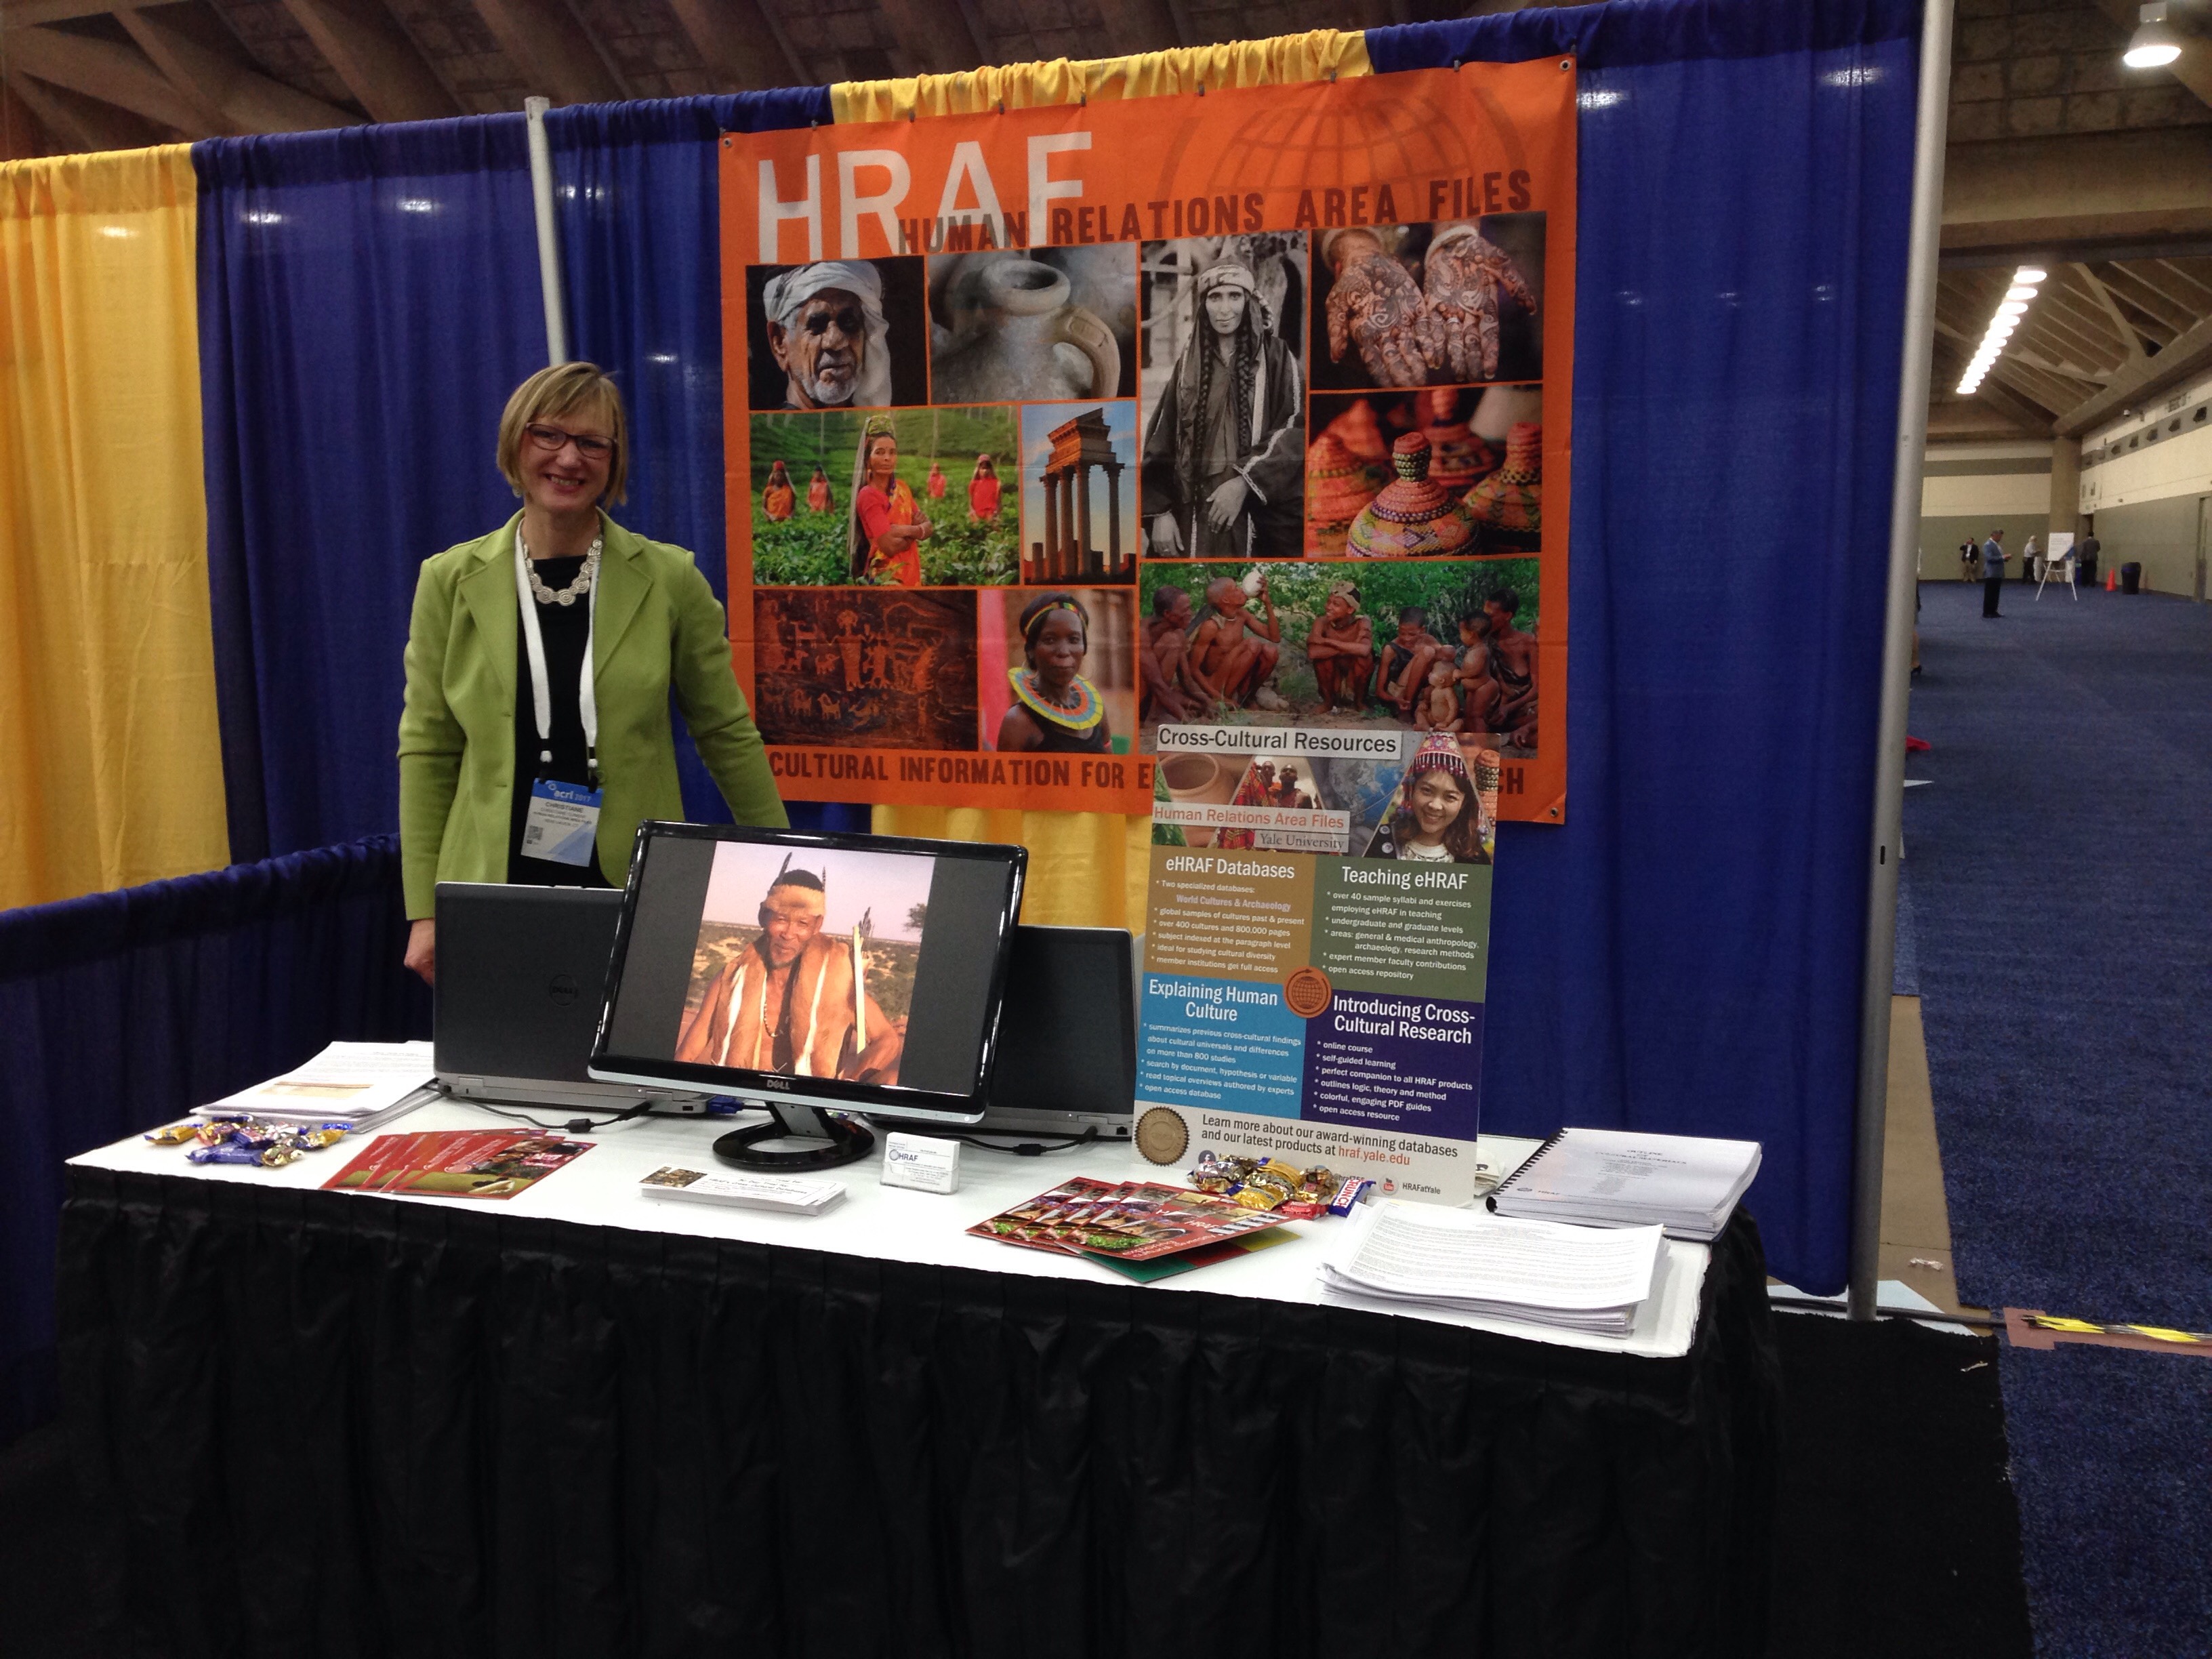 HRAF at Society for American Archaeology (SAA) Conference in Vancouver